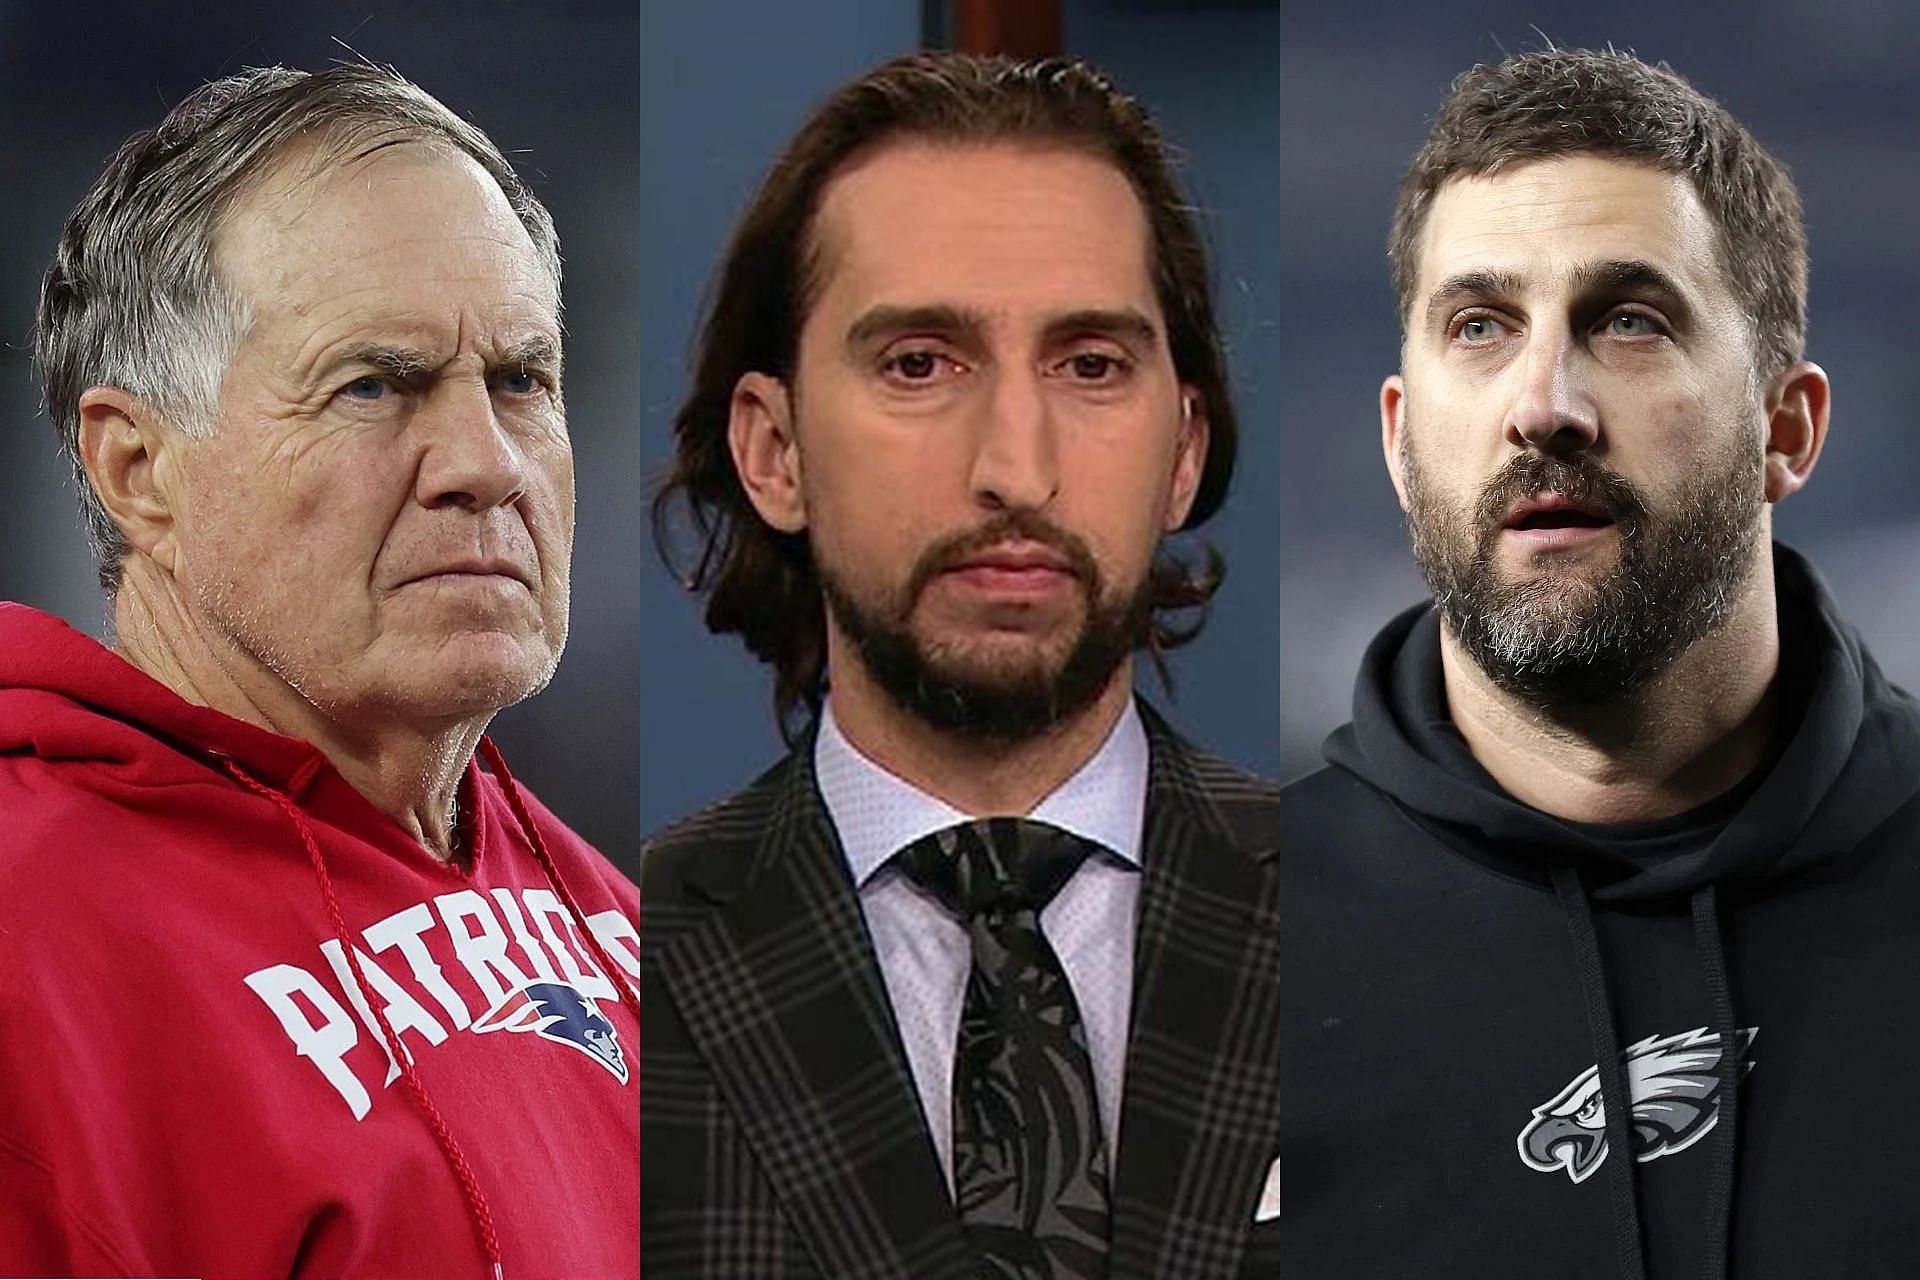 Nick Wright details why Bill Belichick to Eagles is perfect fit with Nick Sirianni facing litmus test against Buccaneers (Pic Credit: Getty Images and Facebook @FirstThingsFirstFS1)